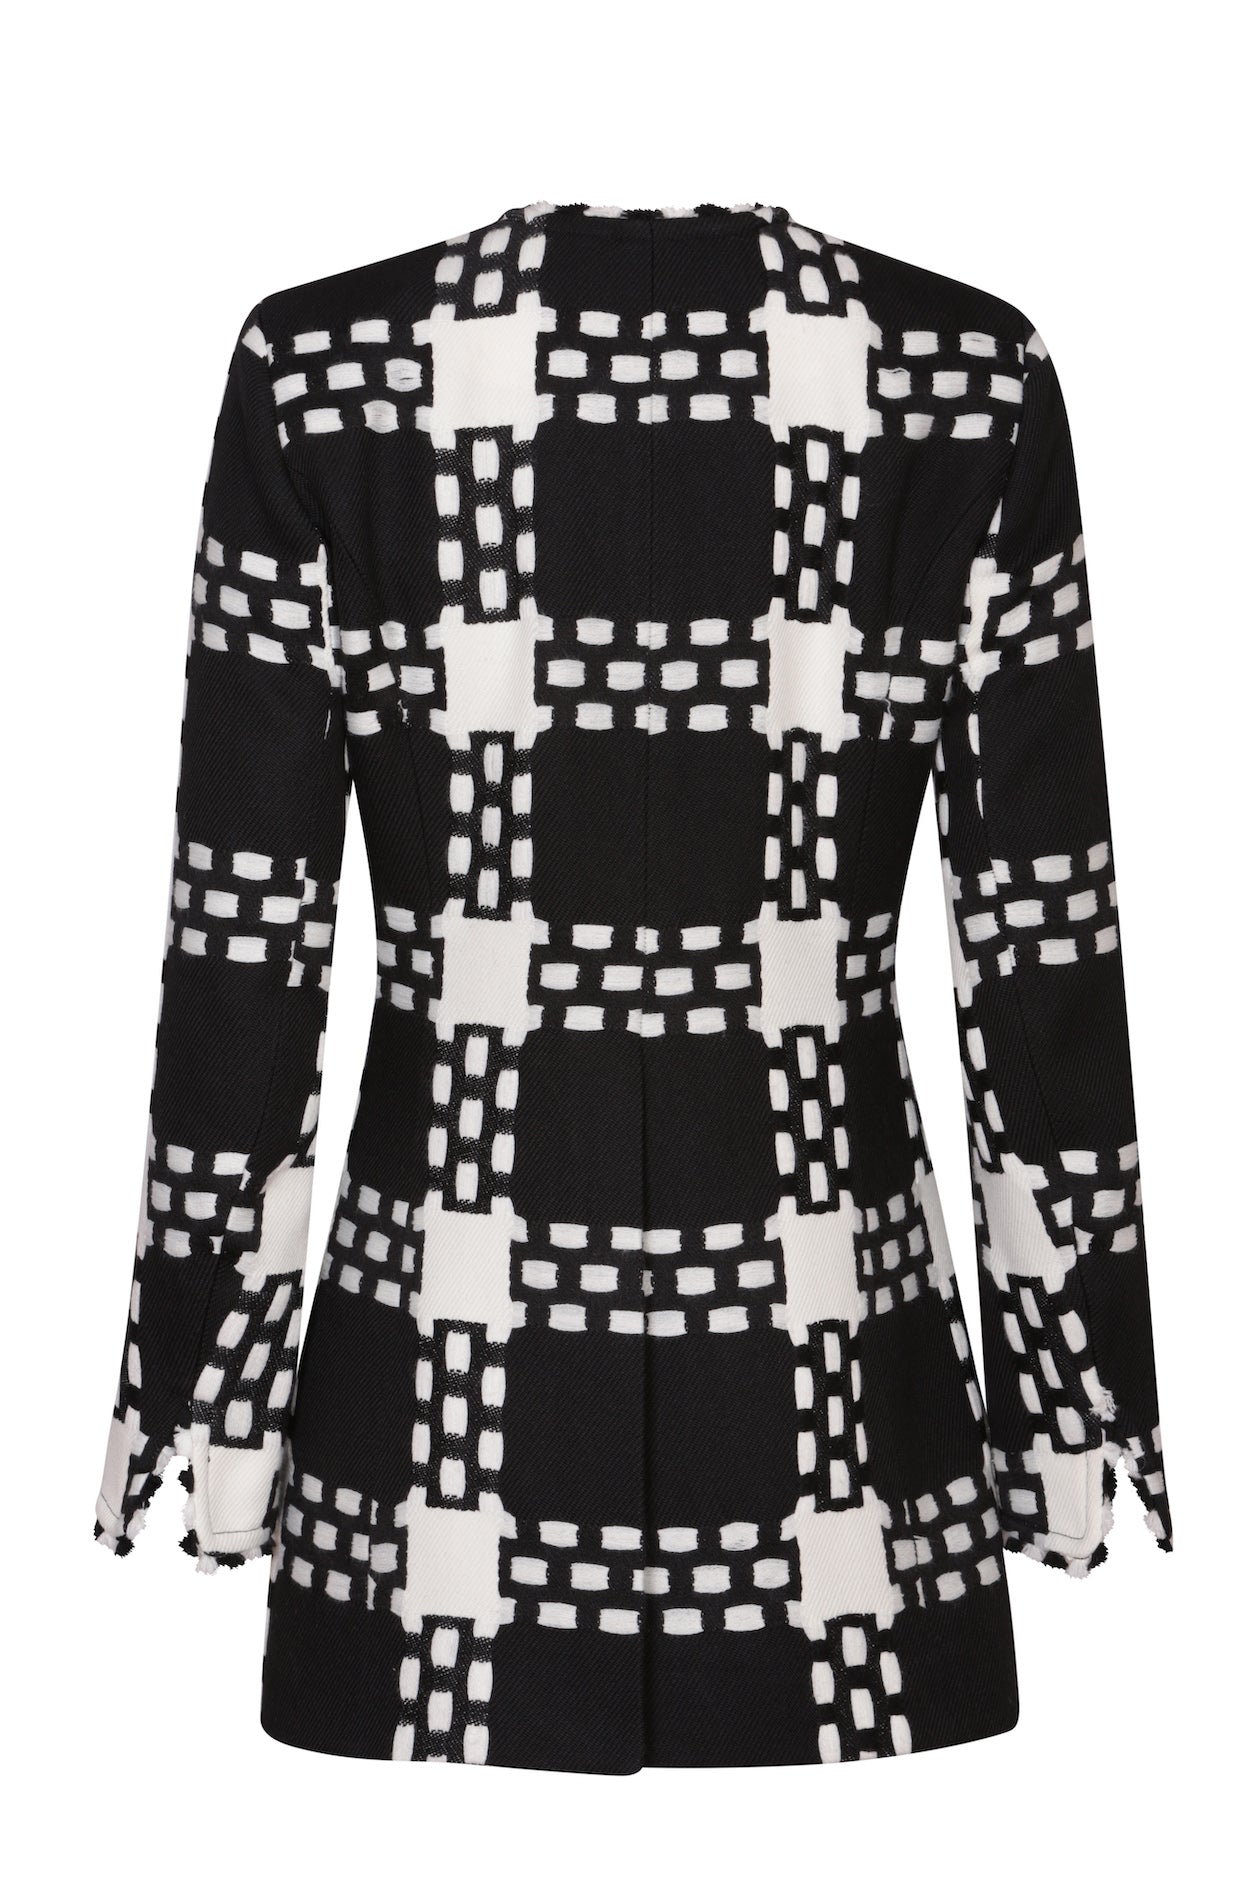 Long Jacket in Black and White Giant Check - Serena